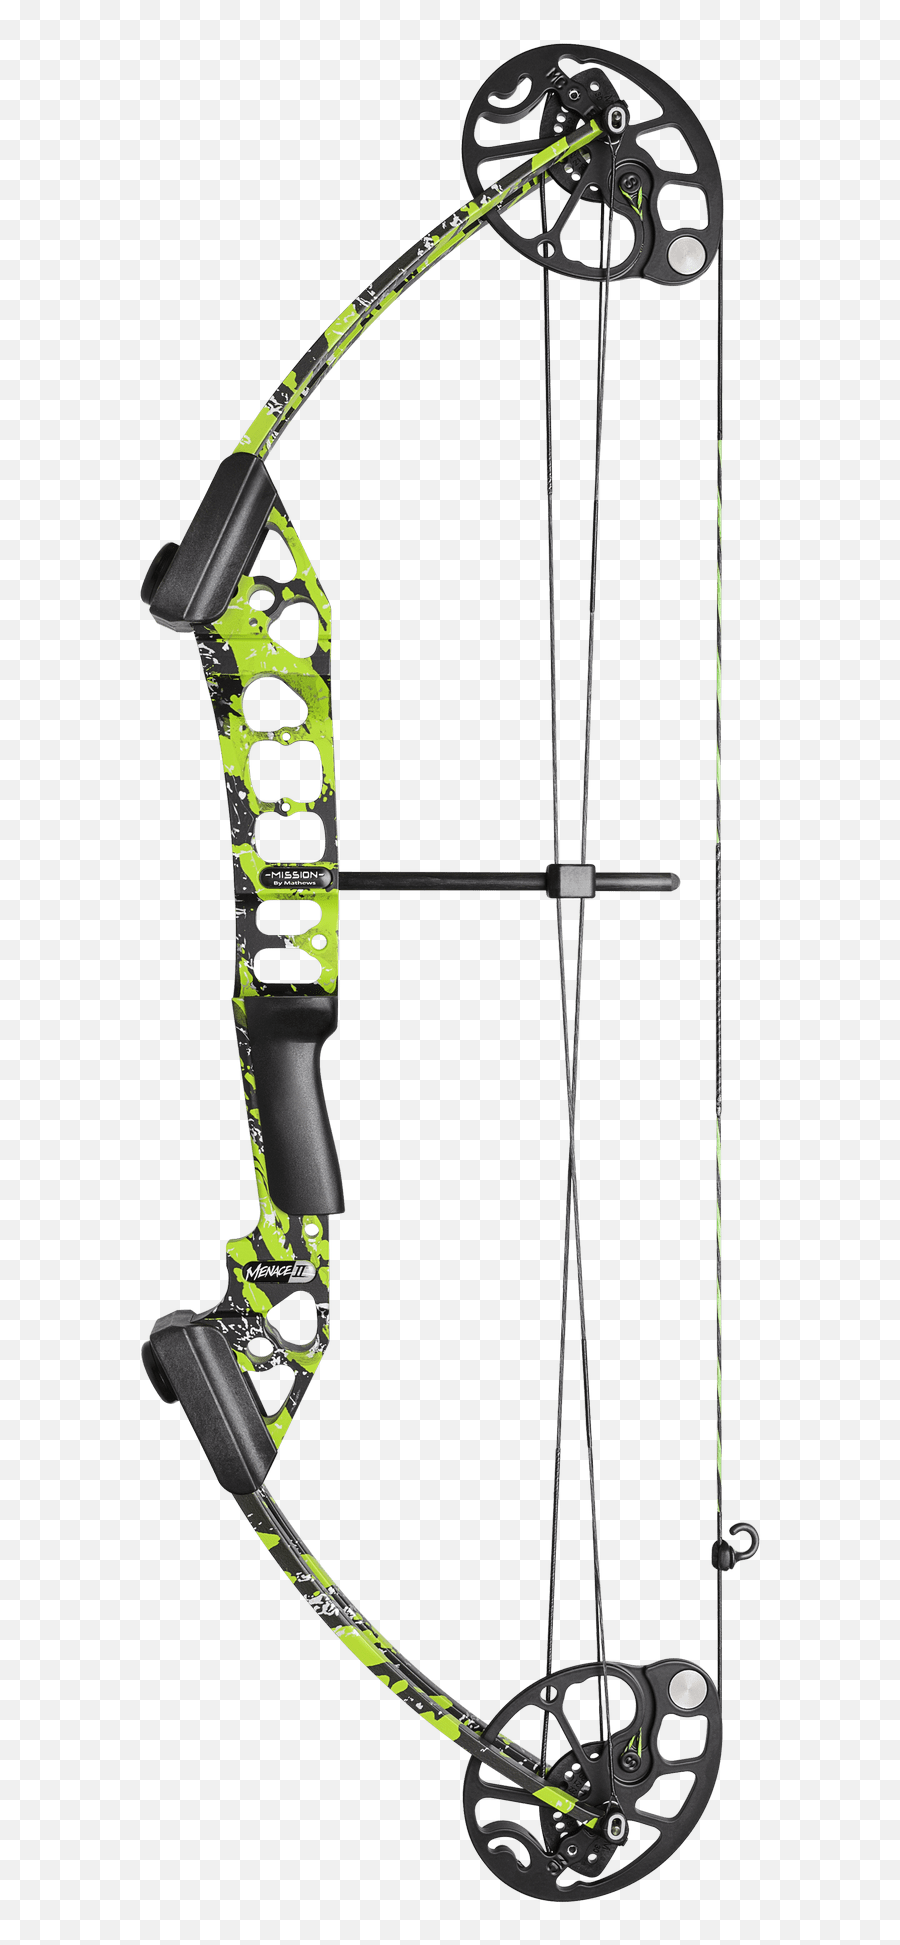 4 New Bow Models Introduced To Mission Line By Mathews Mia - Bow Png,Mathews Icon Bow Price